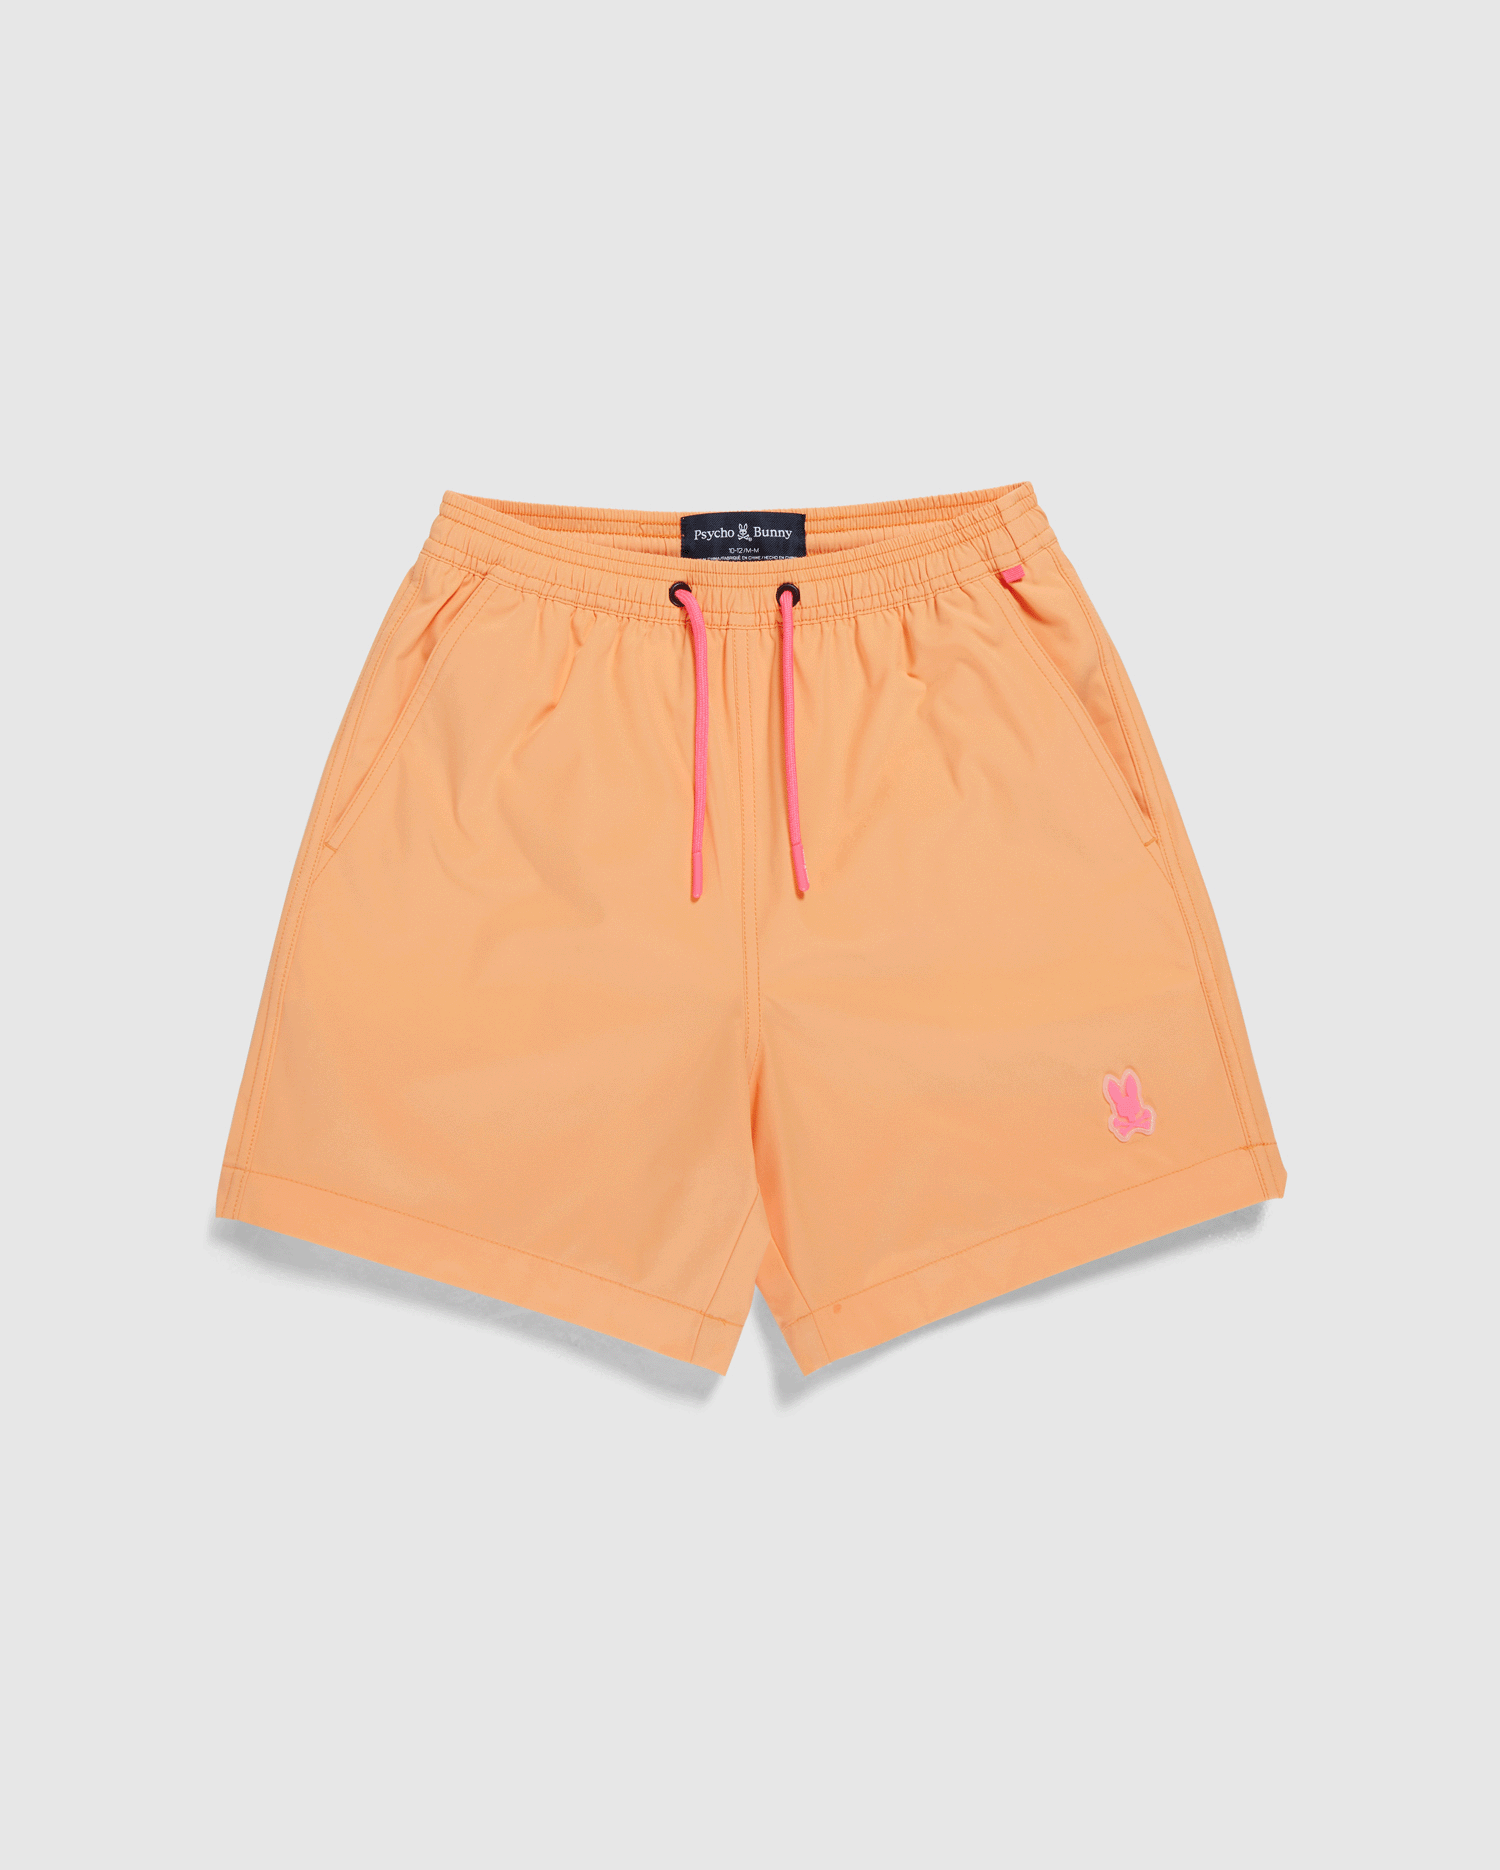 A pair of orange KIDS MALTA HYDROCHROMIC SWIM TRUNK - B0W321B2SW by Psycho Bunny with pink drawstrings at the waistband. The quick-dry material shorts have side pockets and feature a small pink bunny logo on the bottom left leg, set against a plain white background.